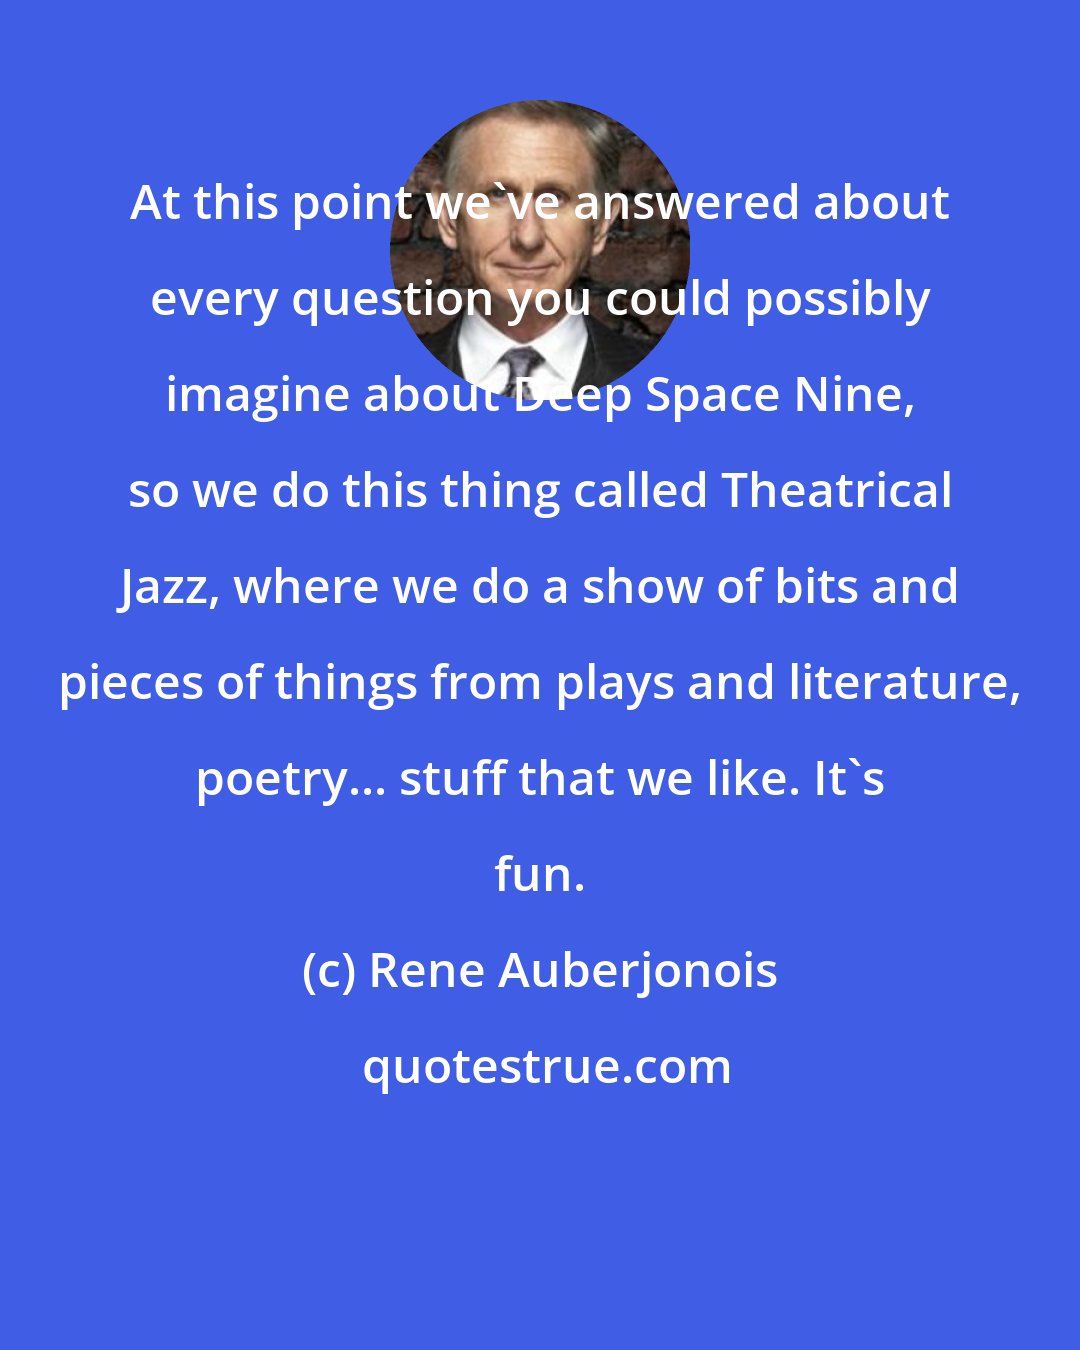 Rene Auberjonois: At this point we've answered about every question you could possibly imagine about Deep Space Nine, so we do this thing called Theatrical Jazz, where we do a show of bits and pieces of things from plays and literature, poetry... stuff that we like. It's fun.